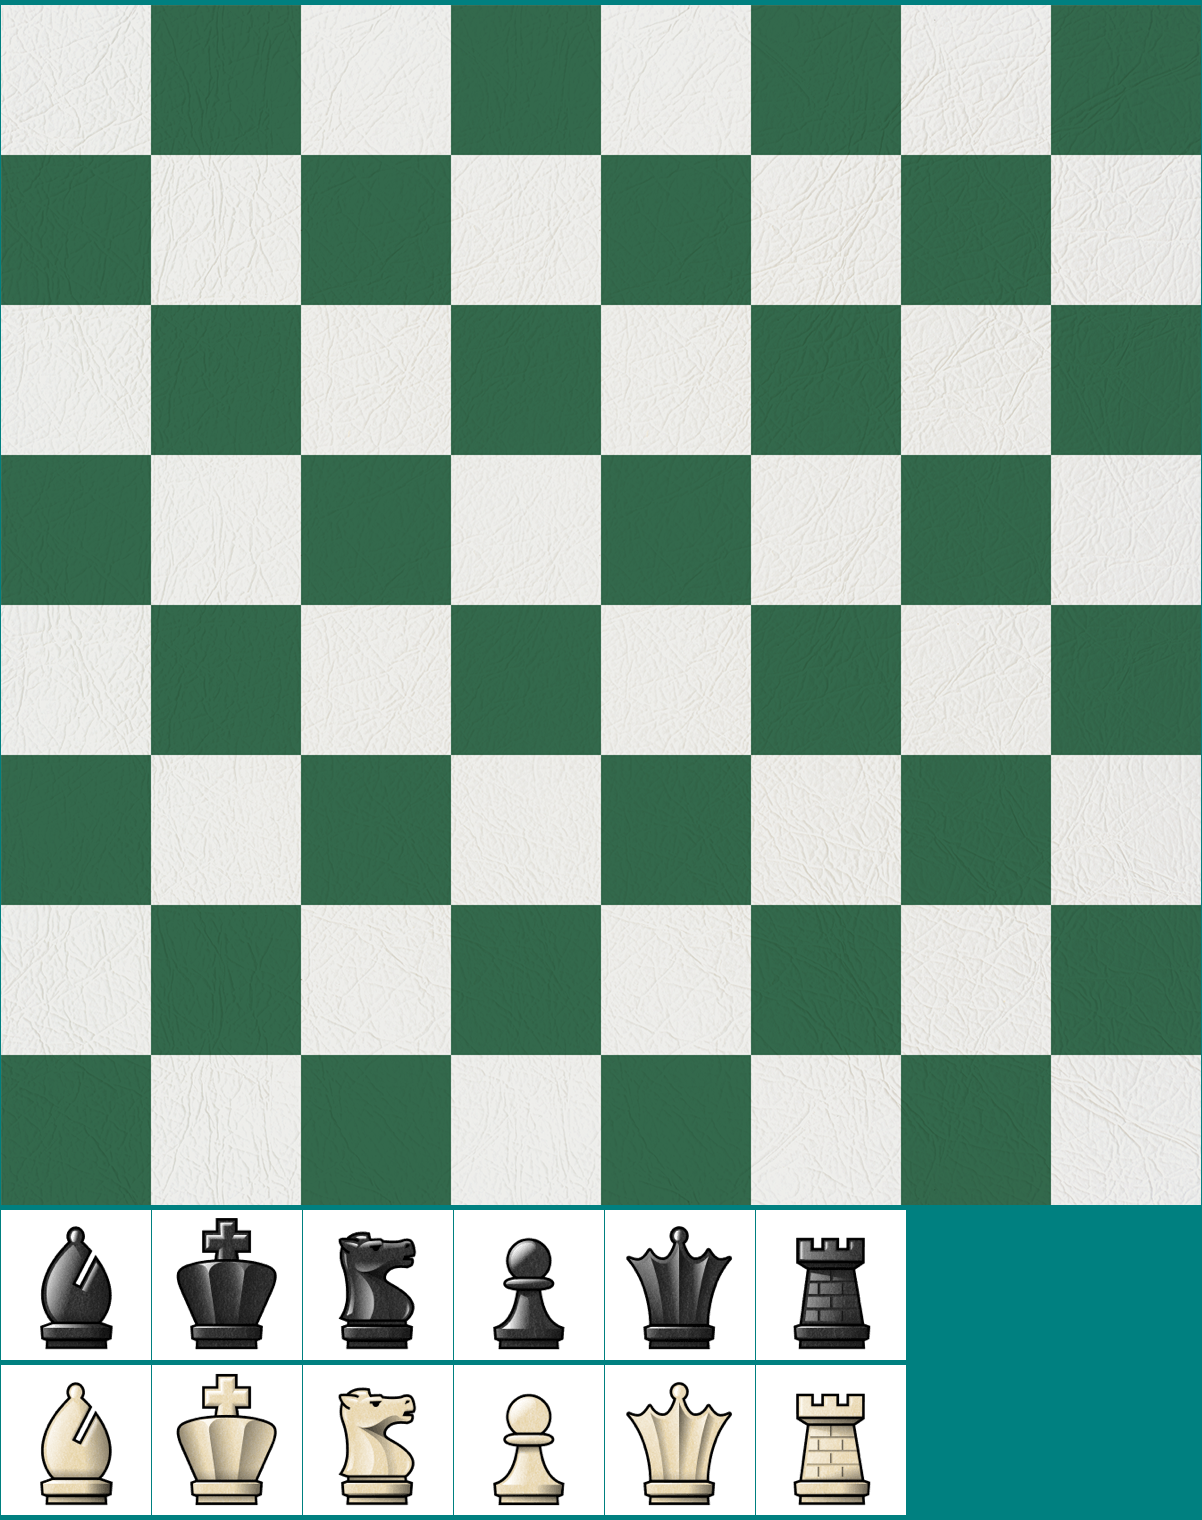 Chess - Board and Chess Pieces (Tournament)